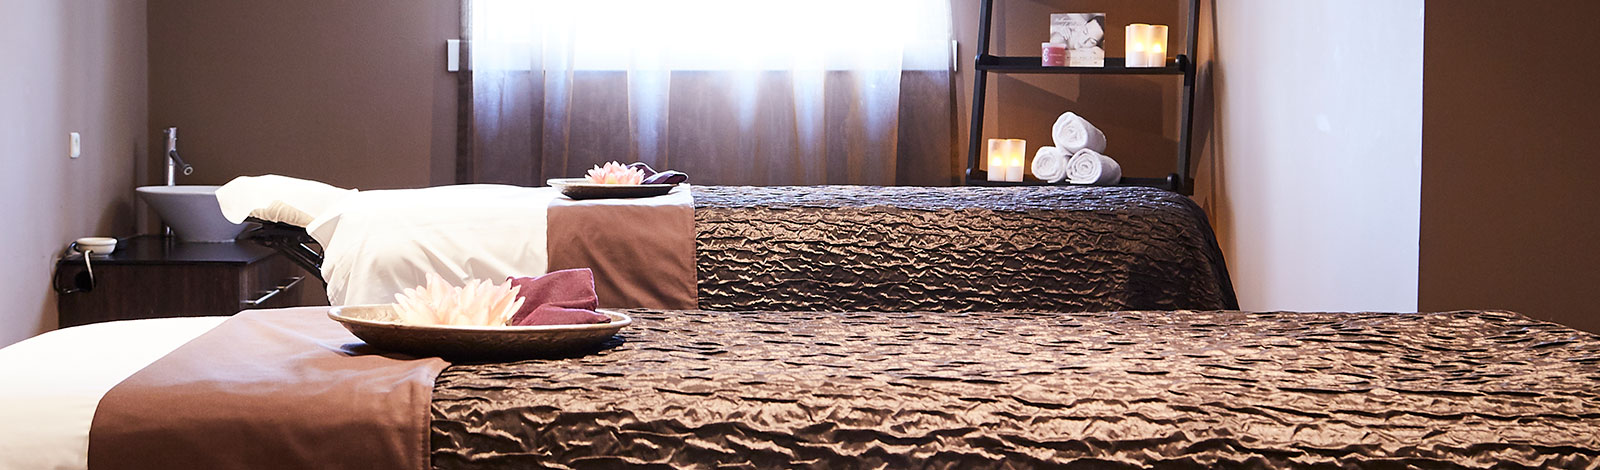 Gentle and nurturing spa treatments make you forget about everyday life.